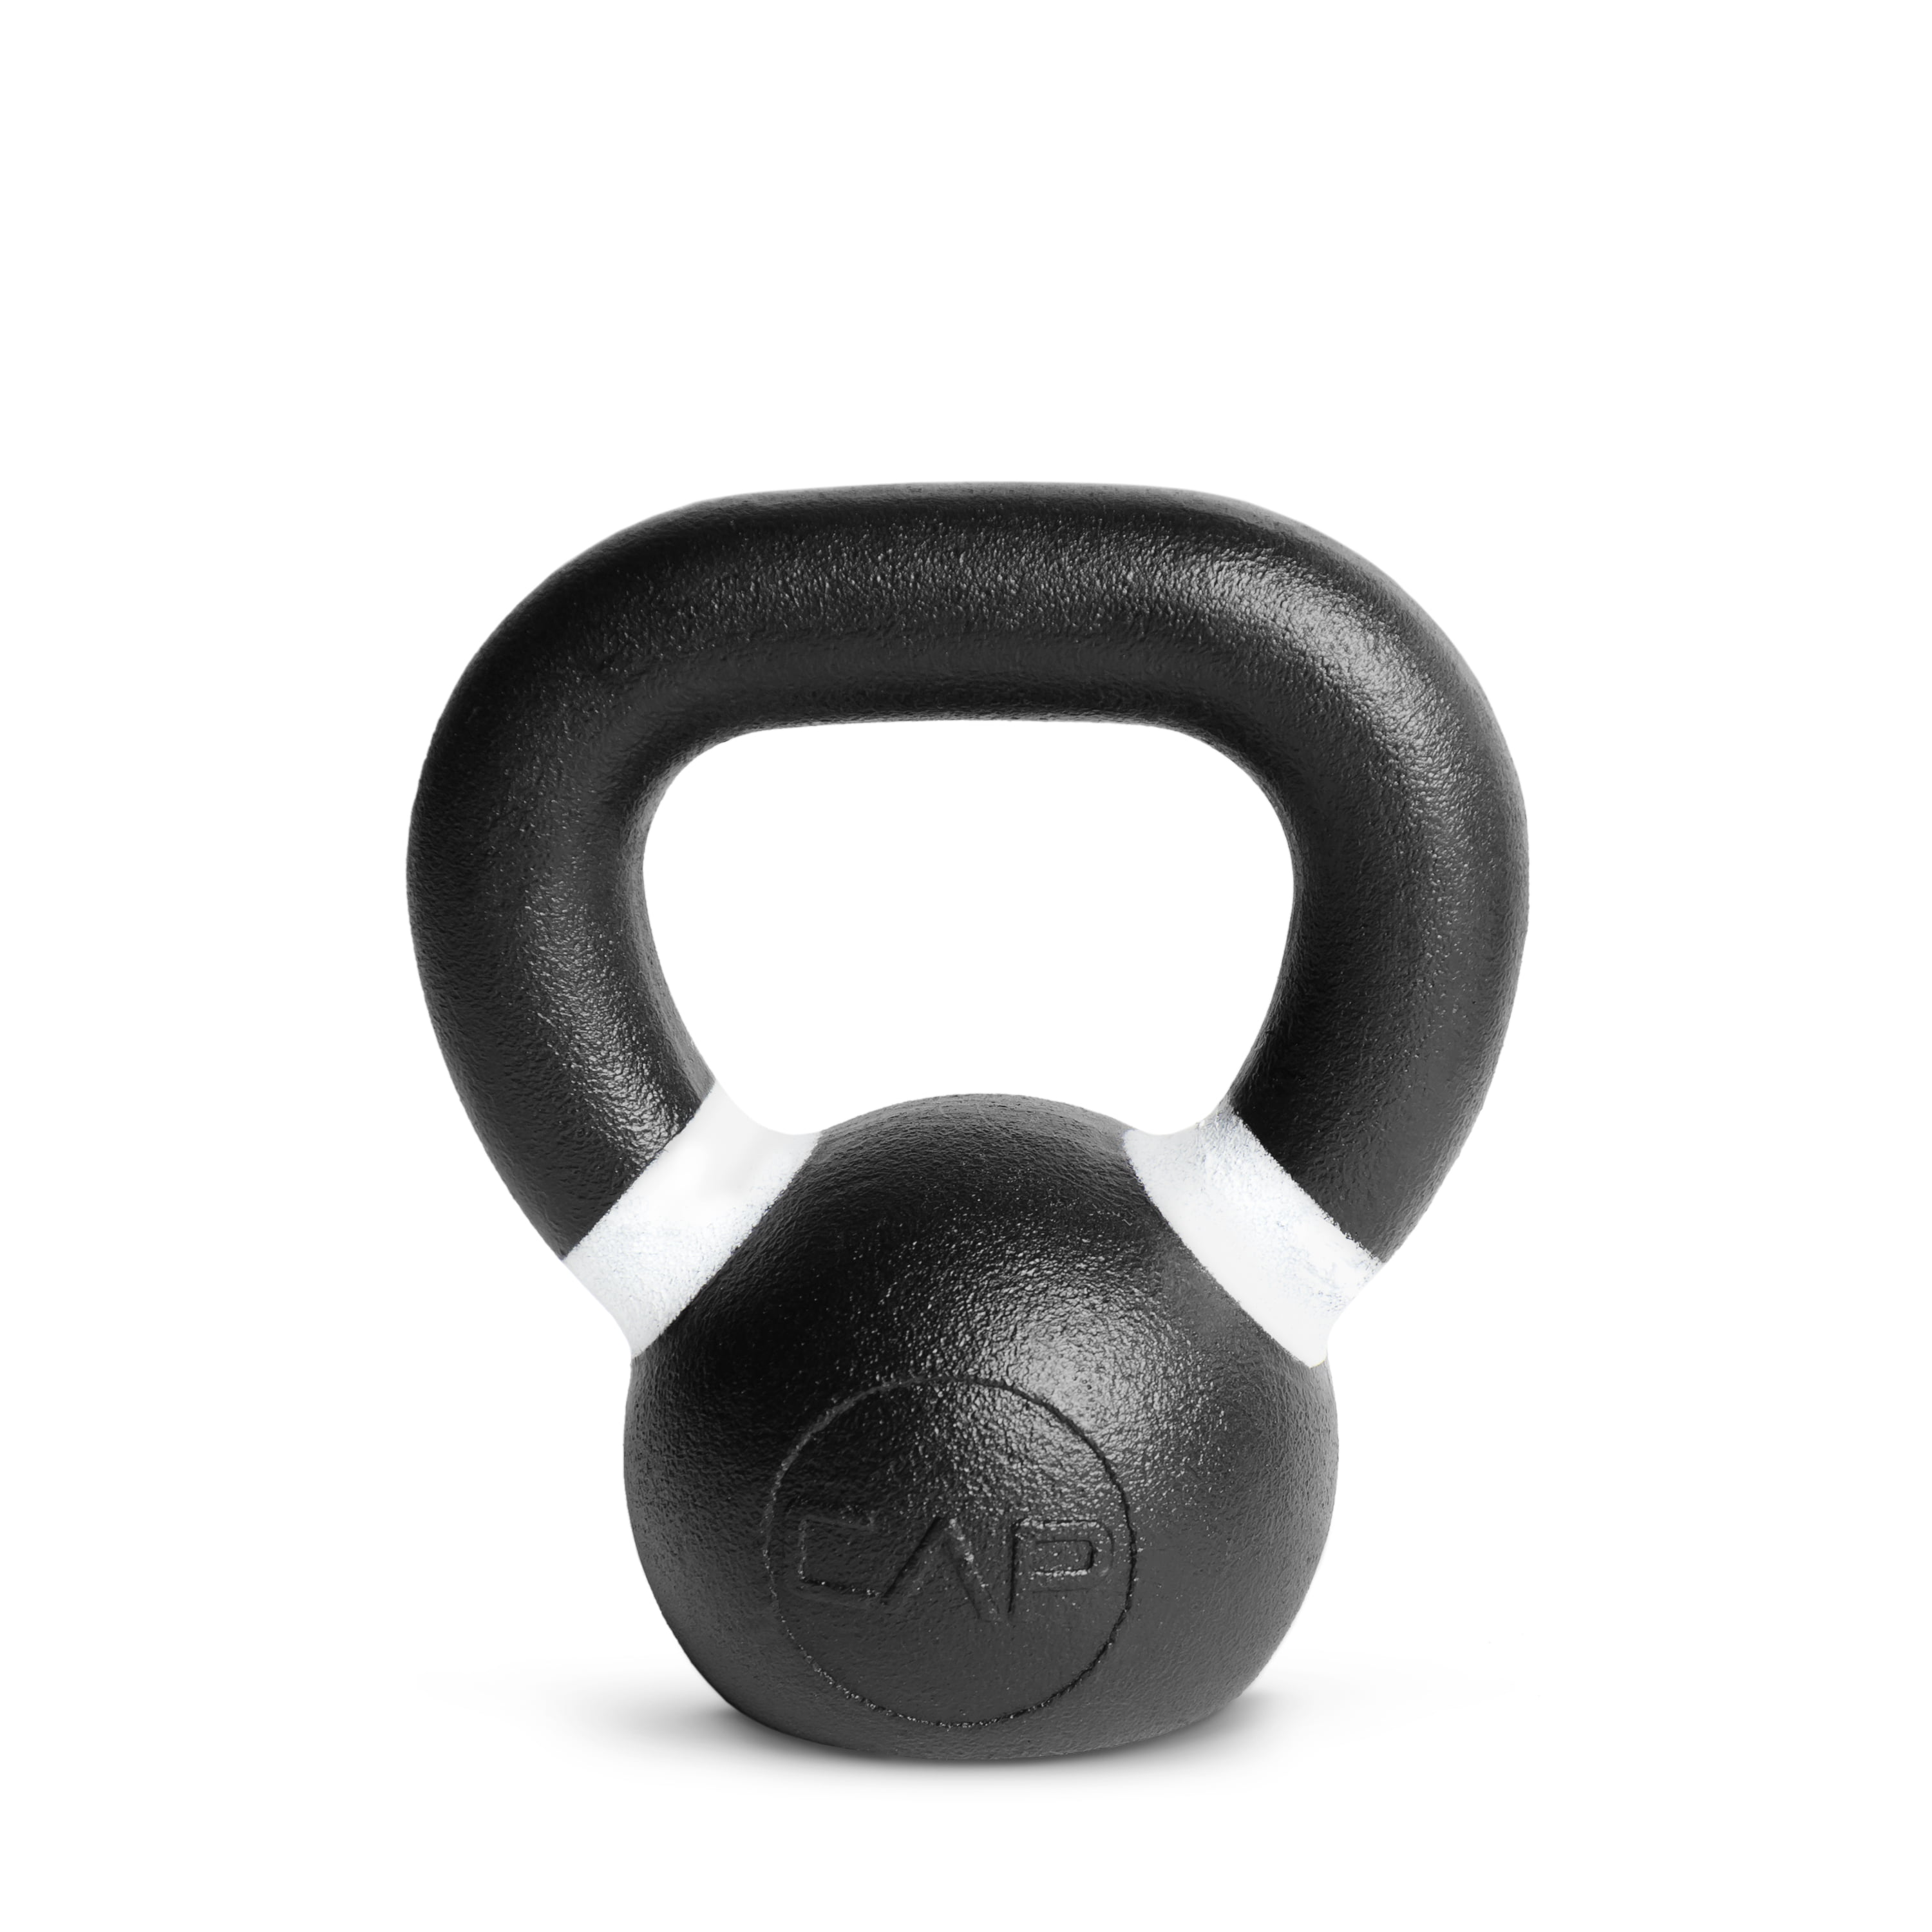 Details about   CAP Rubber Coated Cast Iron Kettlebell Single 10 LB Weight Pound Dumbbell NEW 